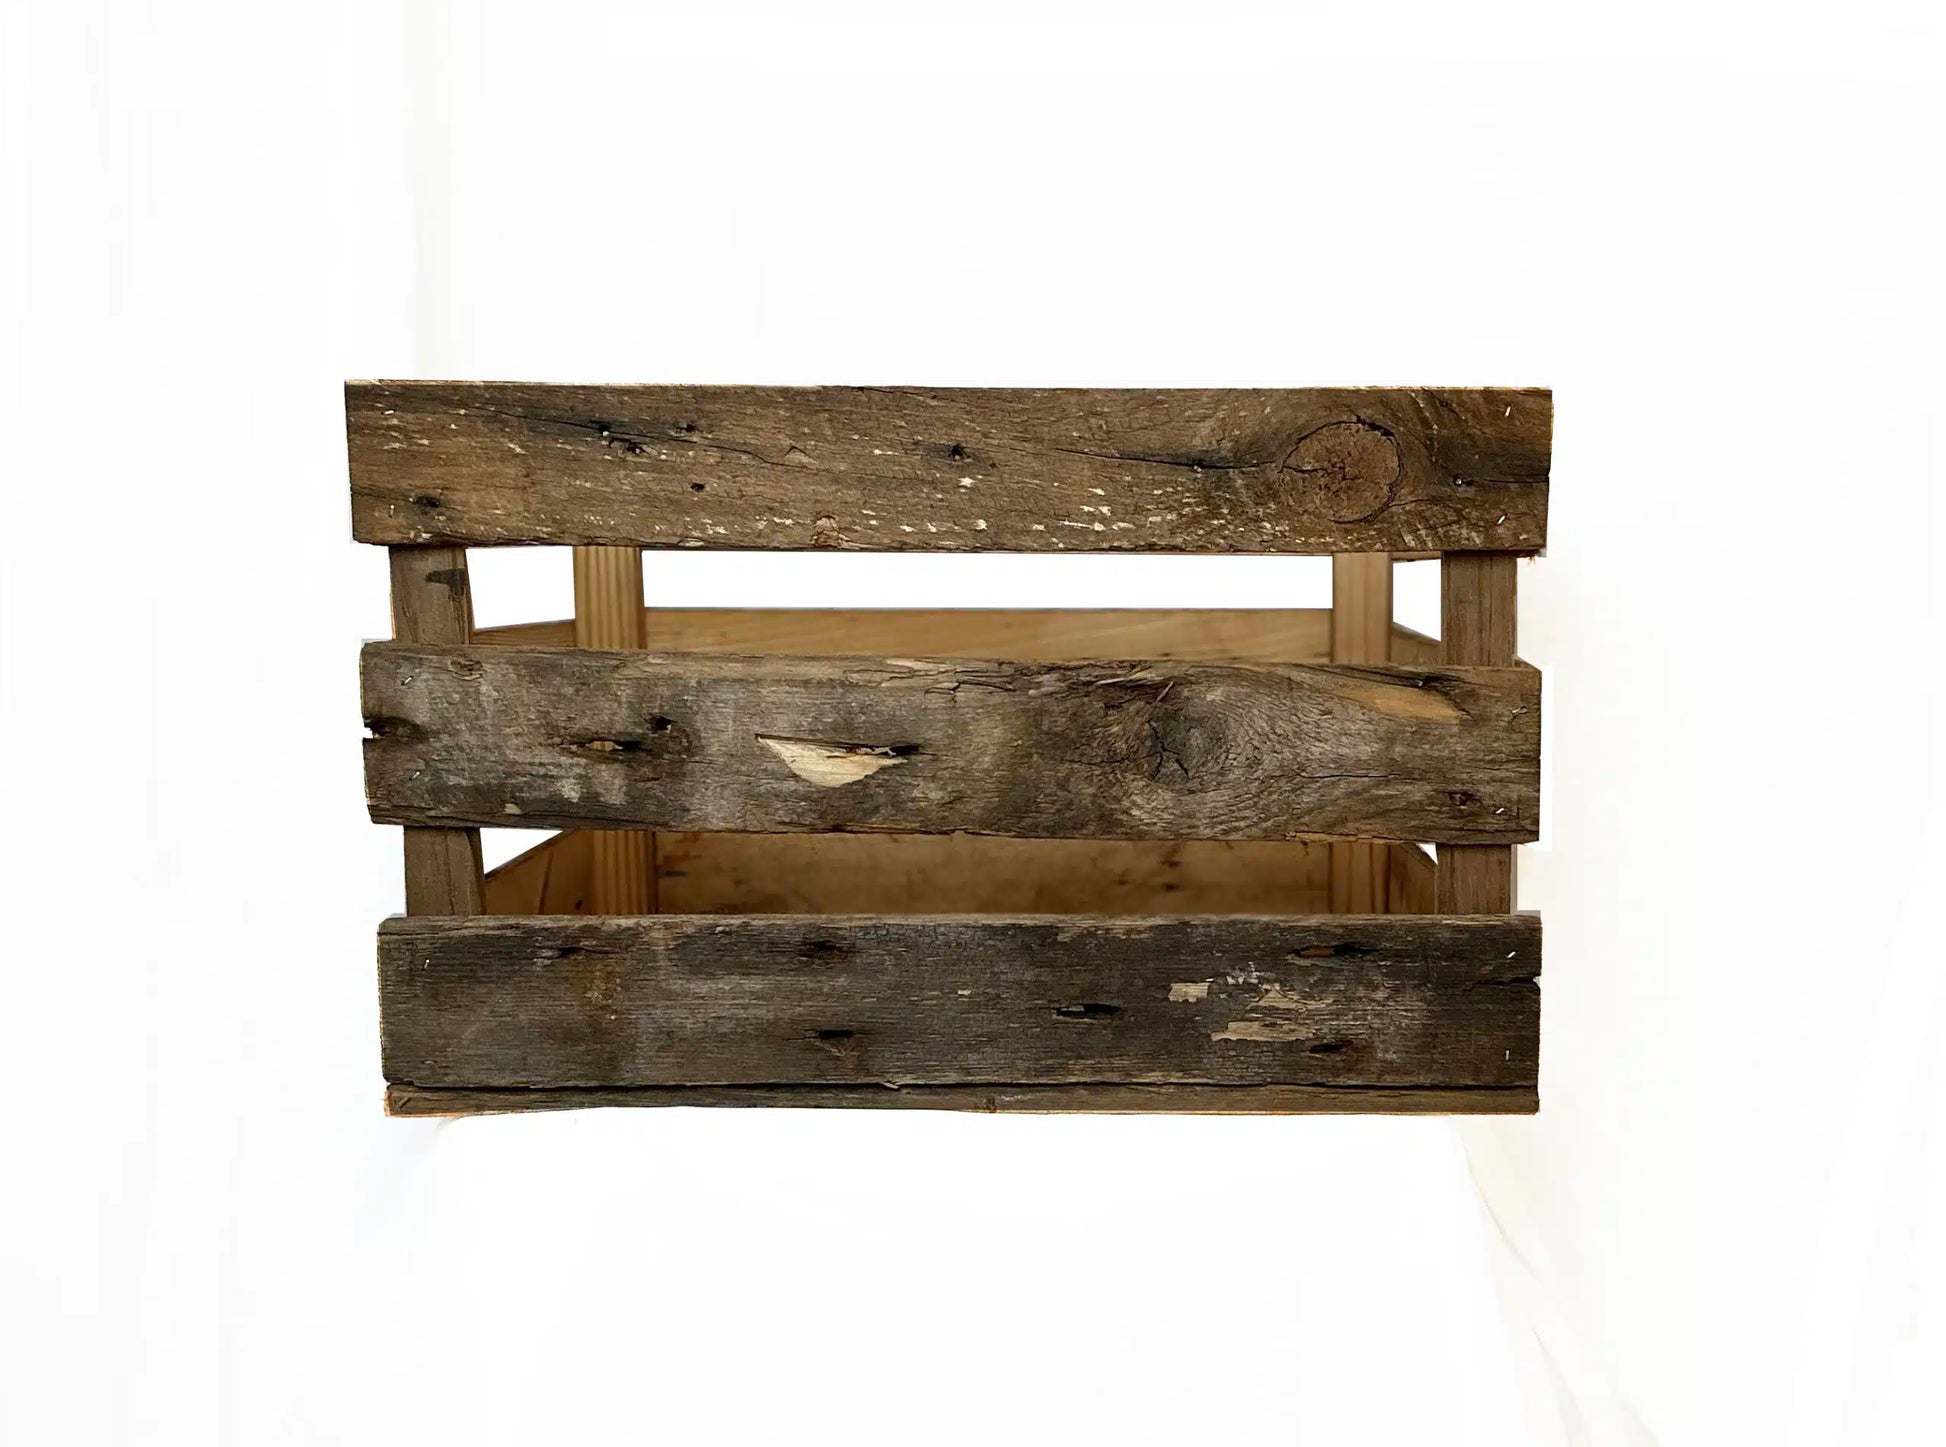 reclaimed wood crate with spaces in between the slats. There are three slats with an equal space in between. Wood displays distressed characteristics.